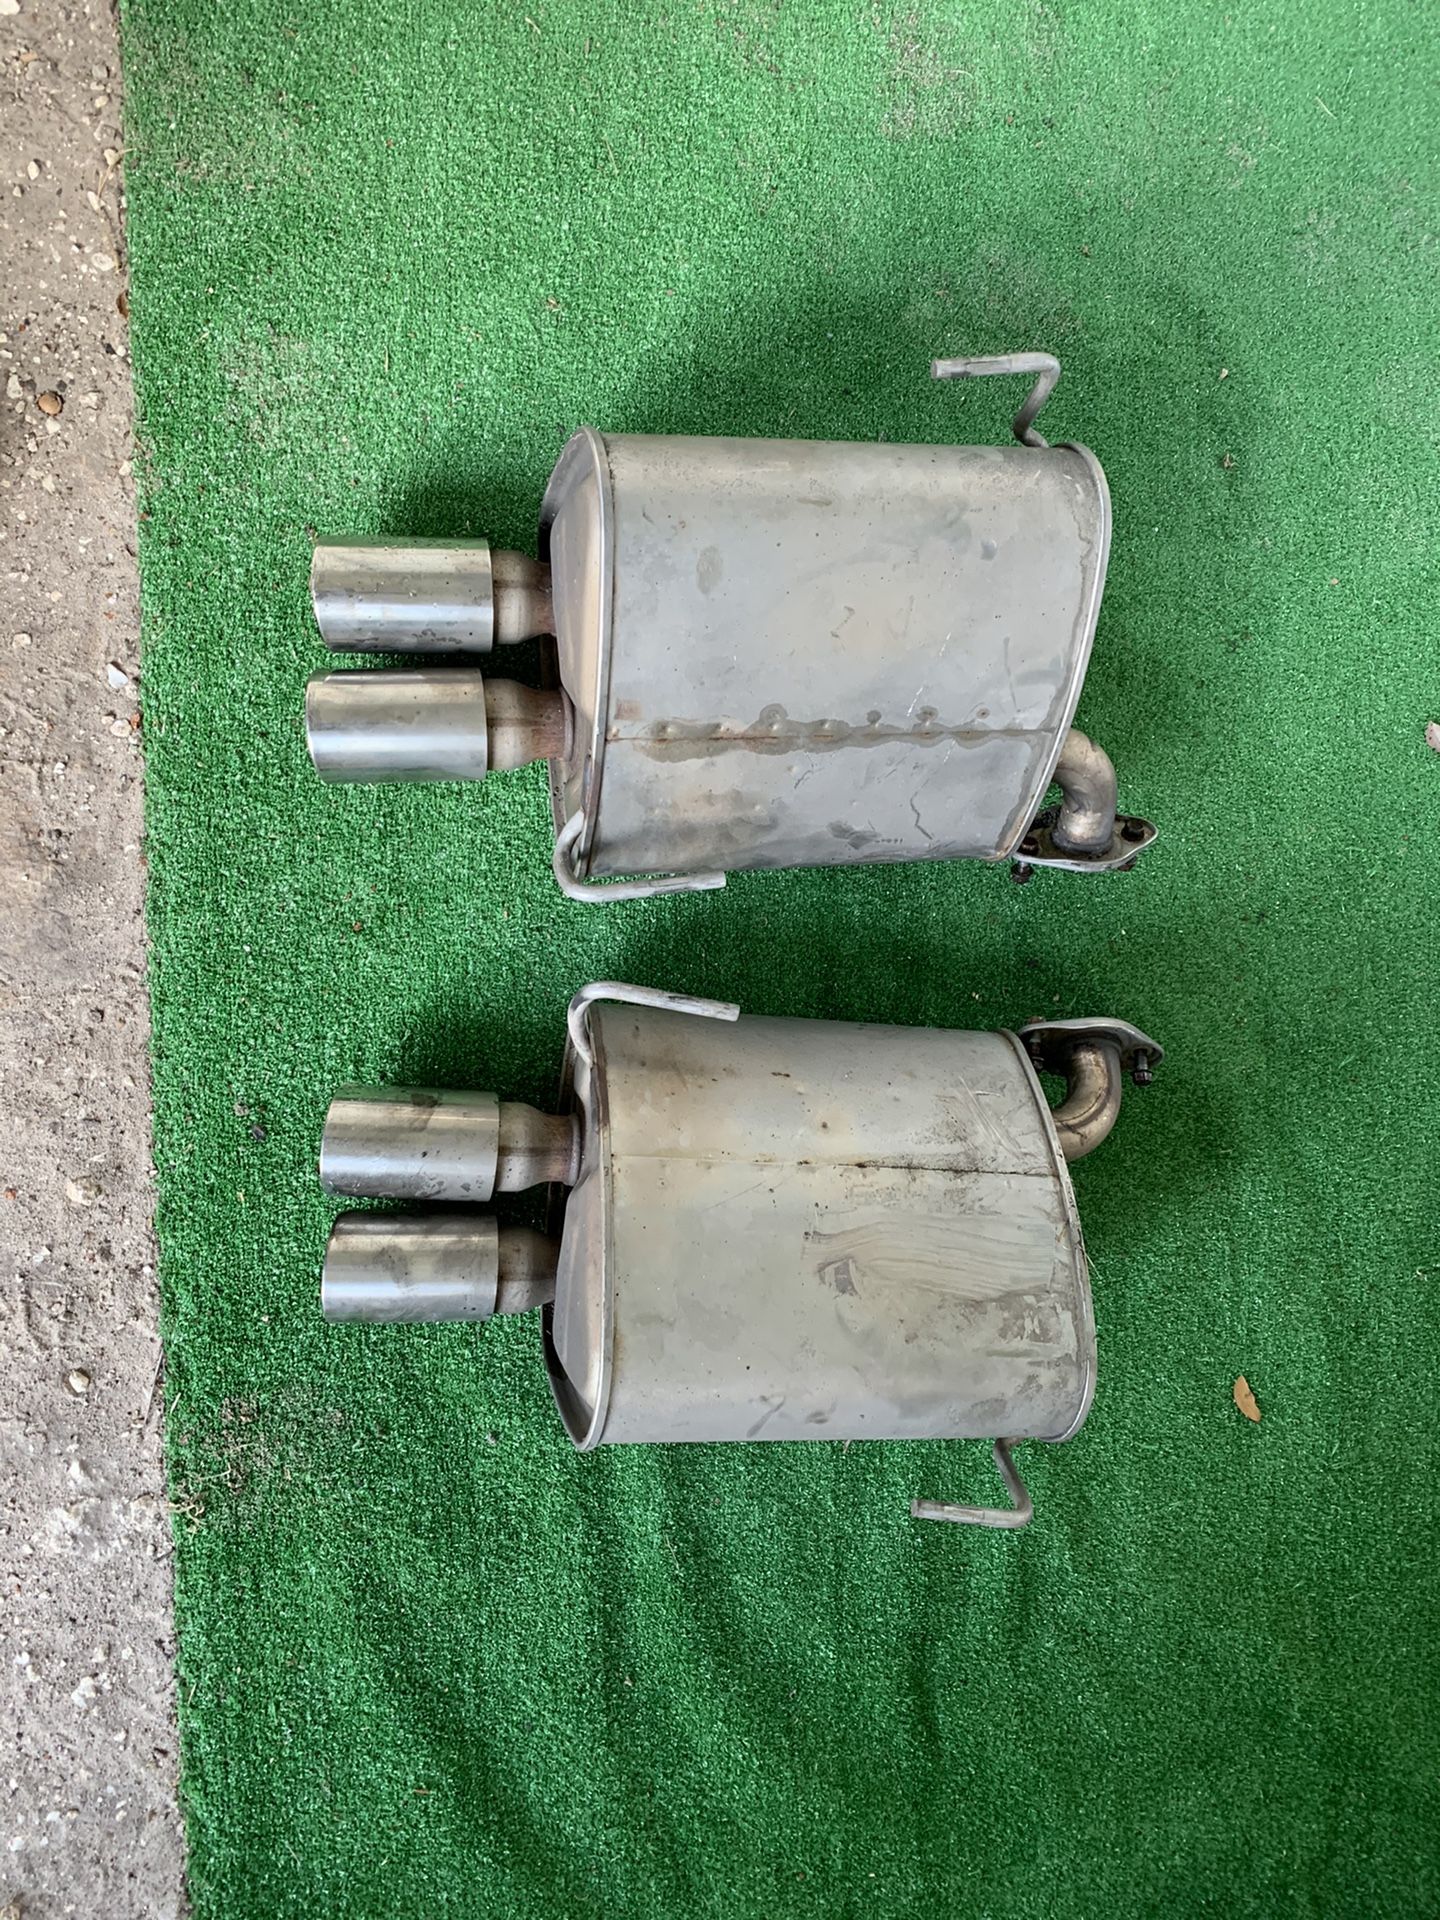 Subaru double mufflers/used/in very good condition